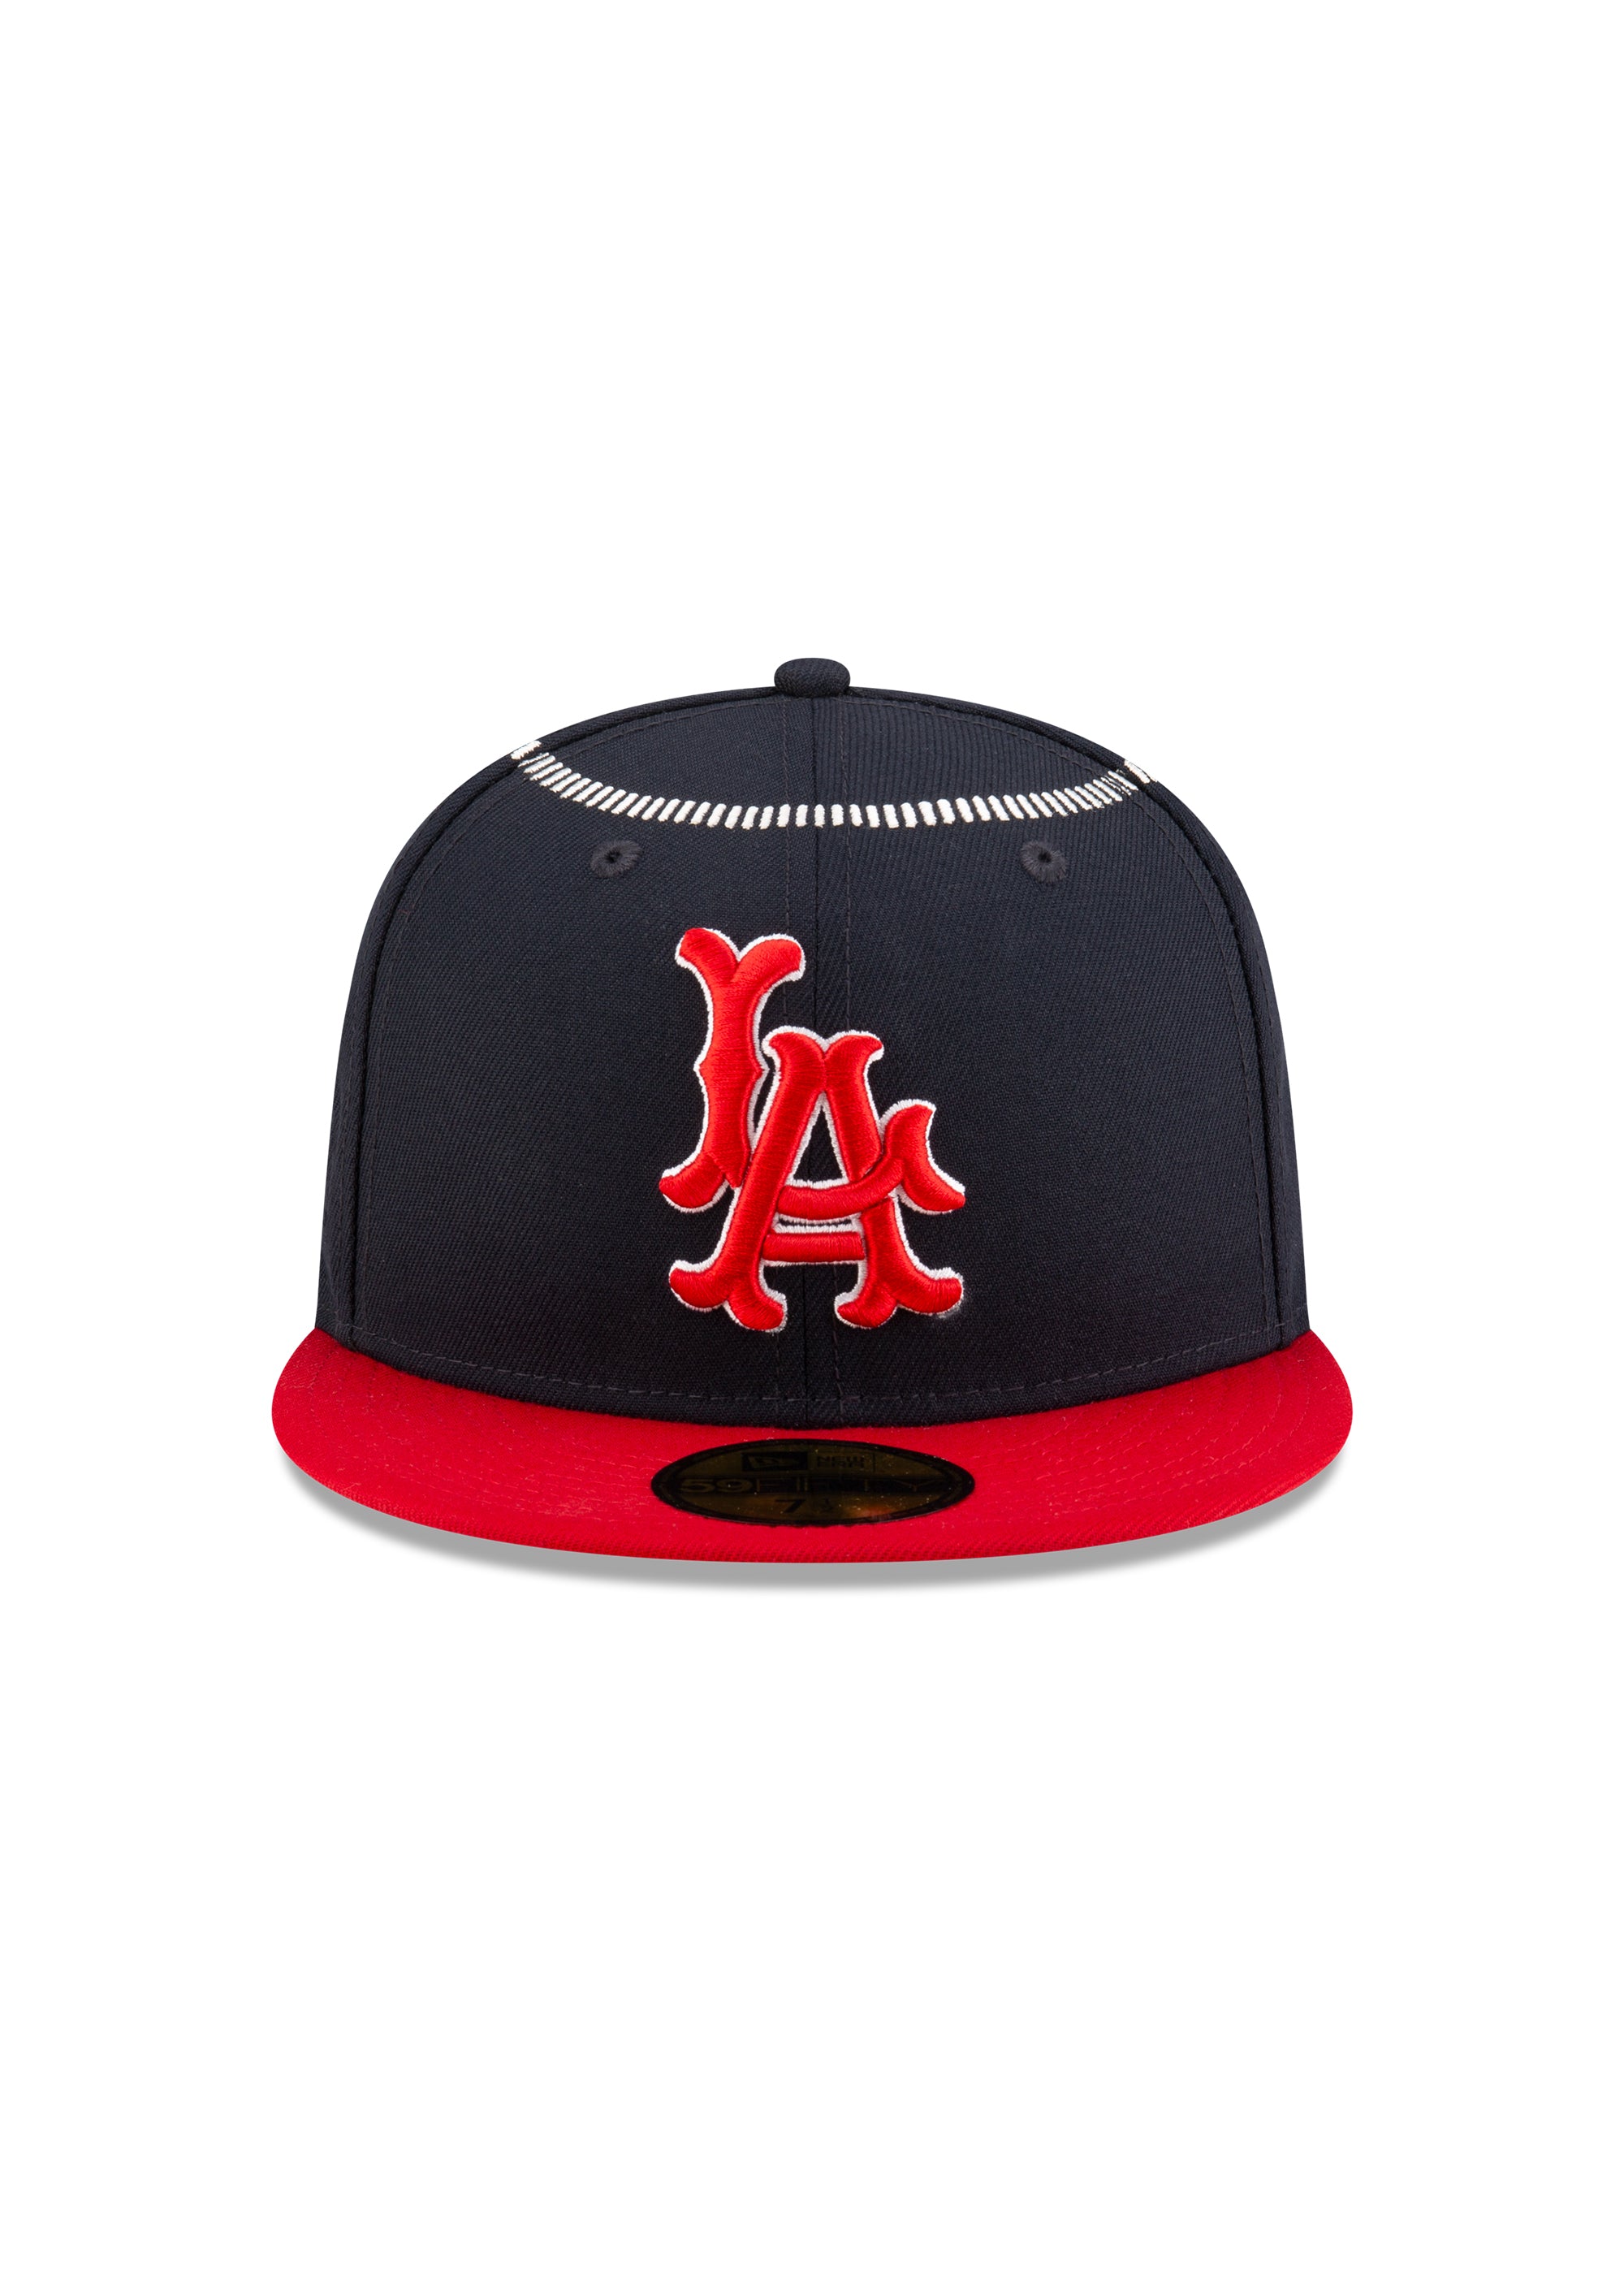 Los Angeles Angels - Navy/Red